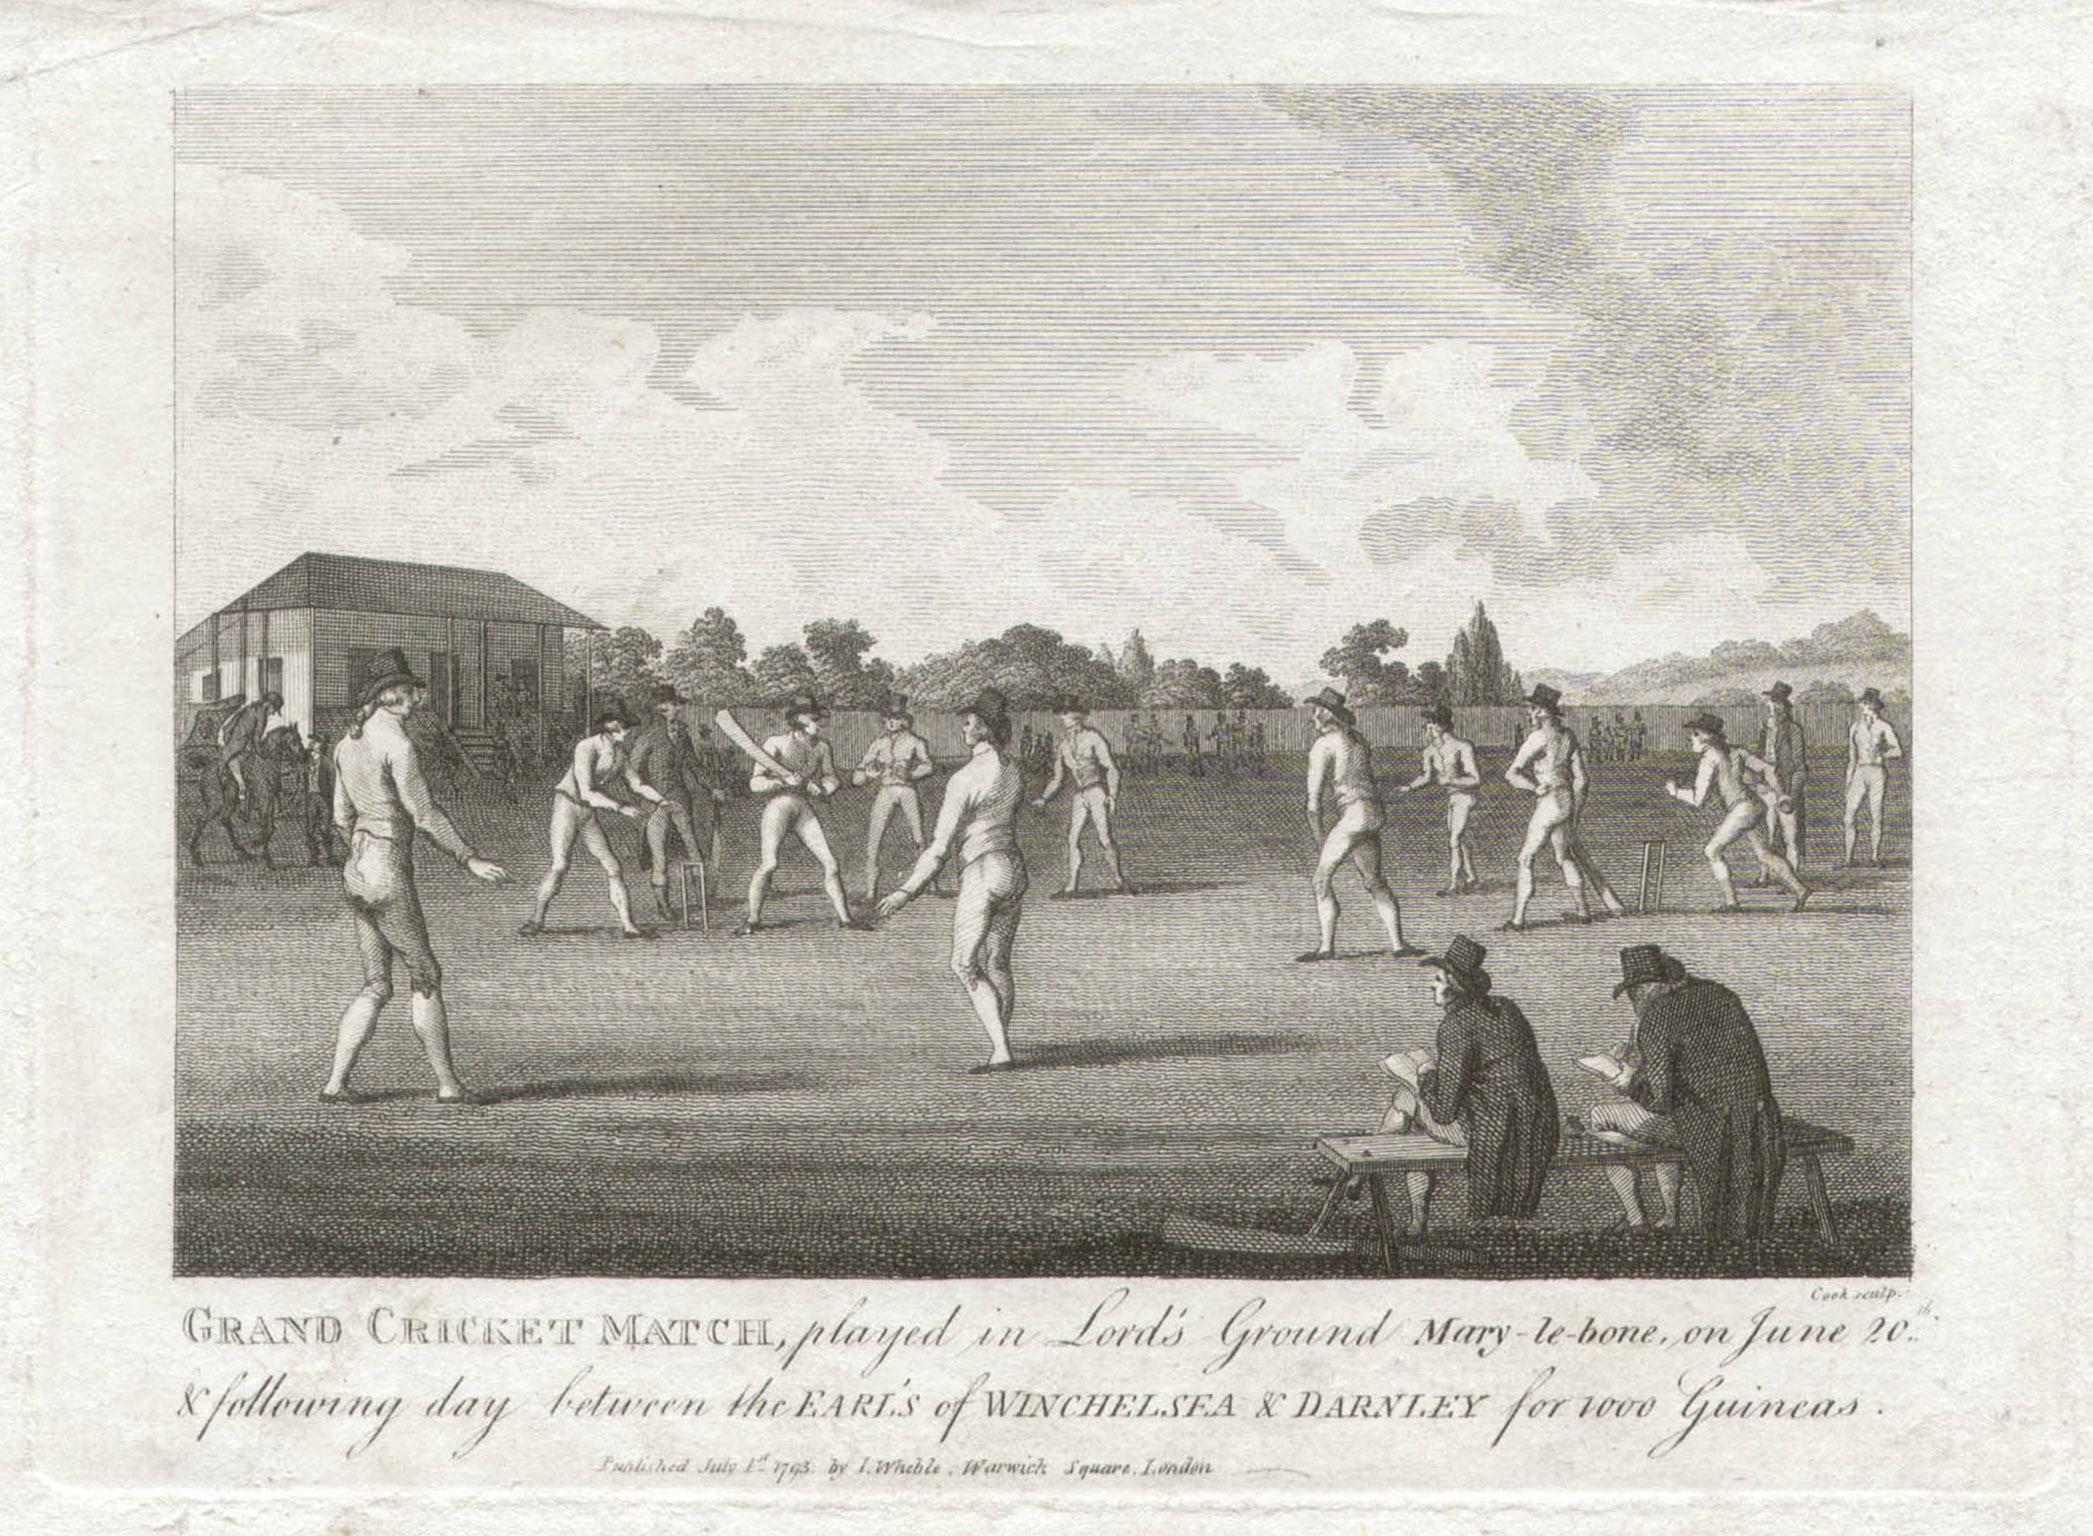 Grand Cricket Match at Lord's Ground, Marylebone, sport engraving, 1793